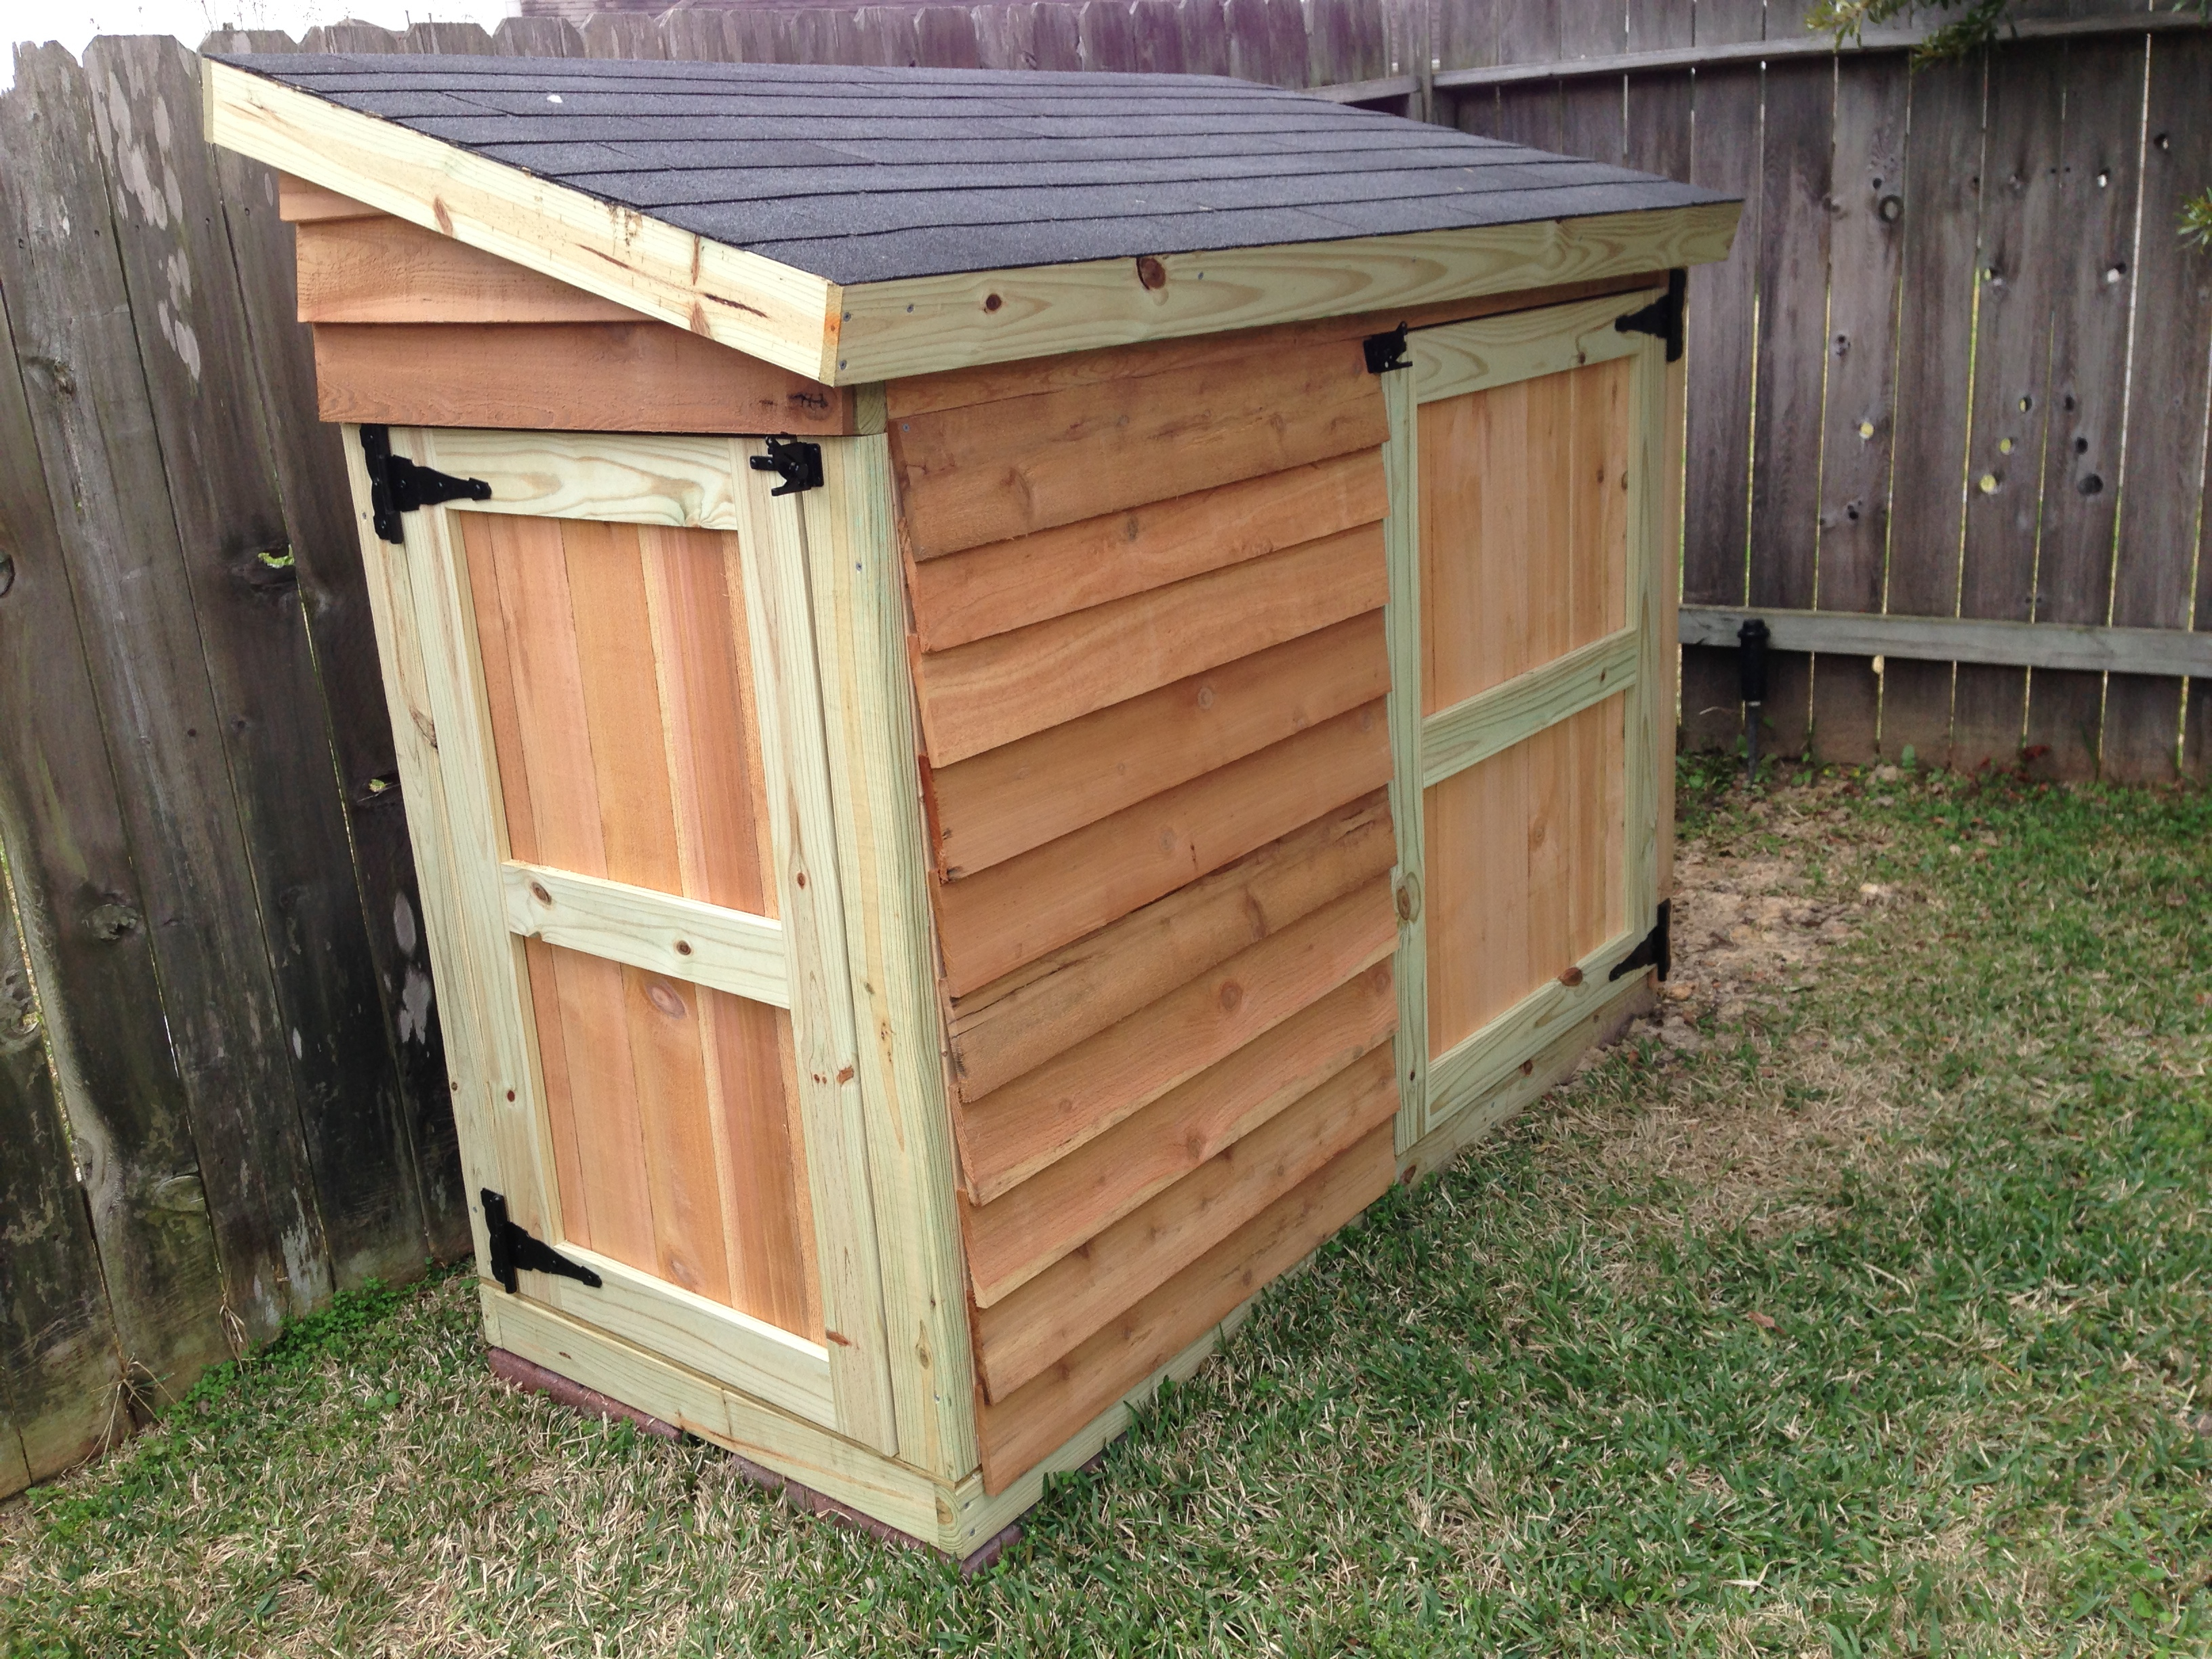 Ana White Lawnmower Shed Diy Projects pertaining to size 3264 X 2448